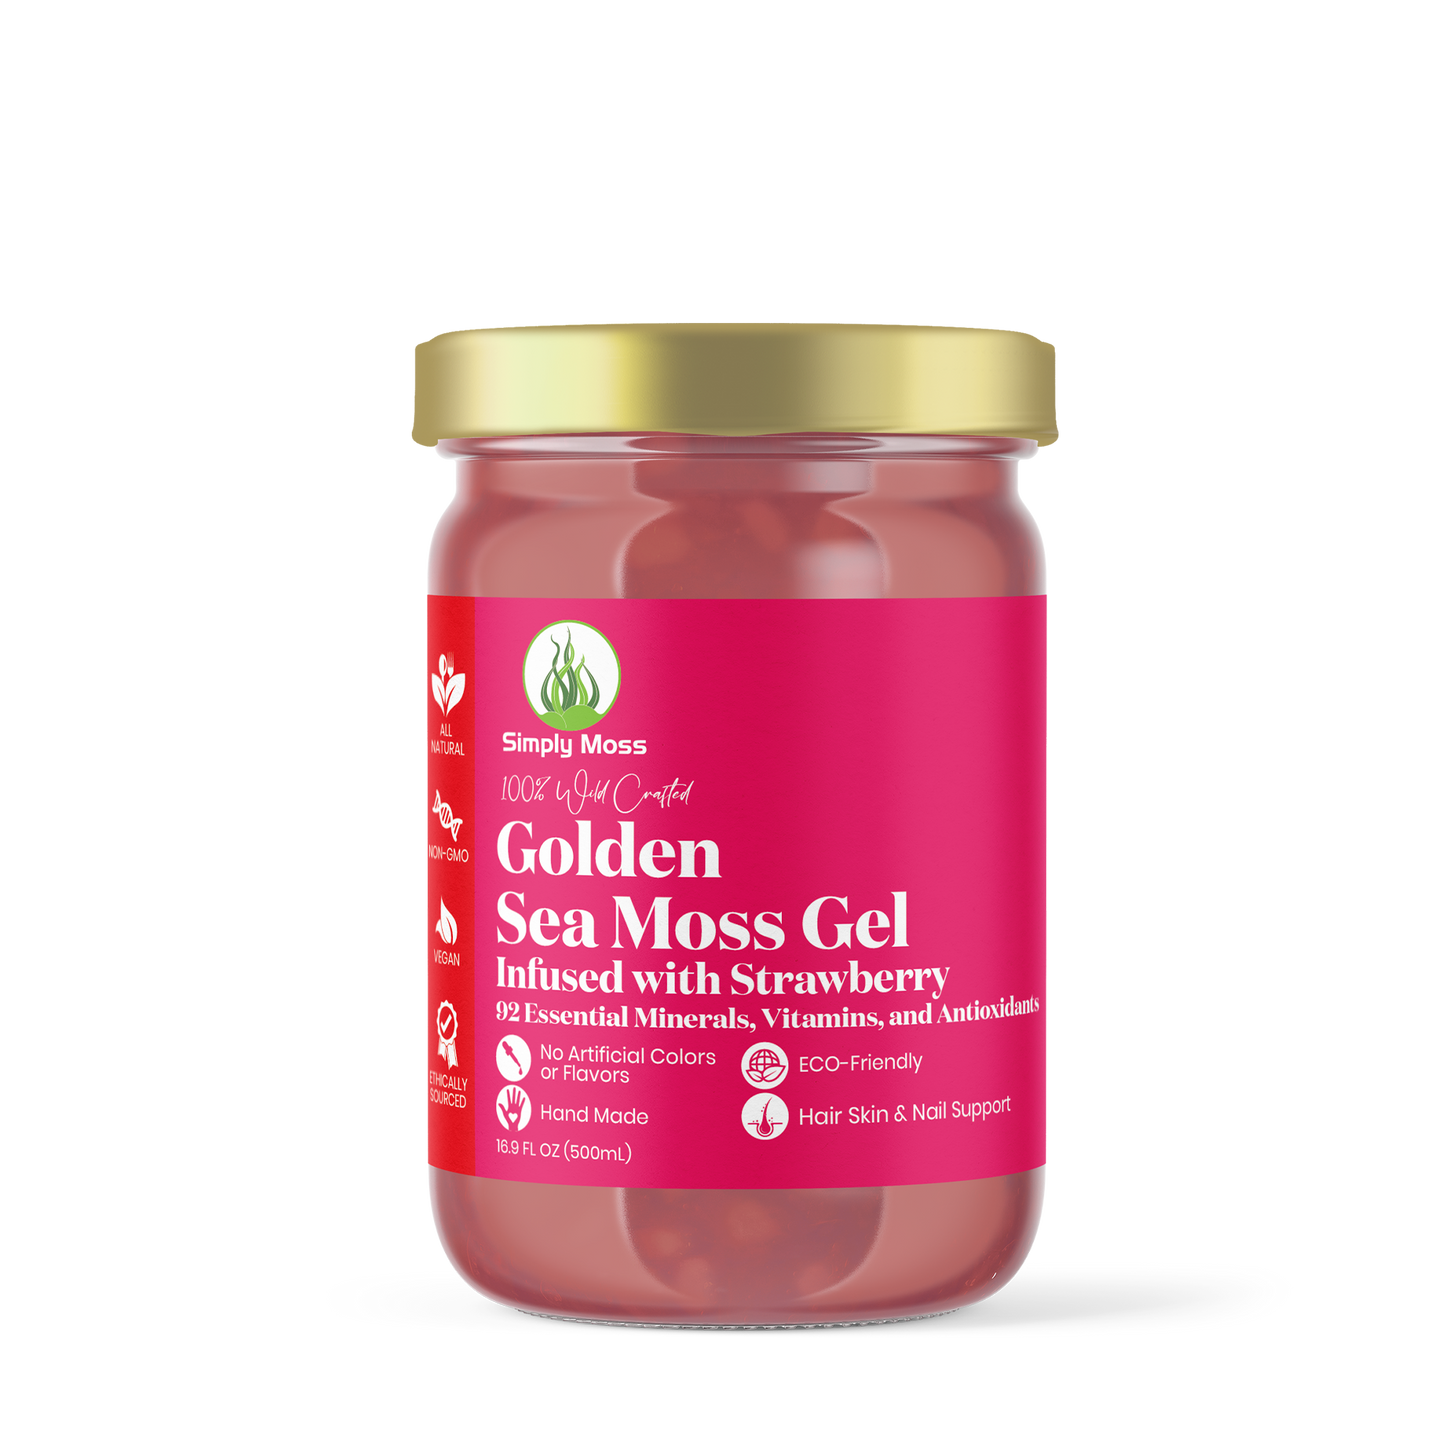 Golden Sea Moss Gel Infused With Strawberry